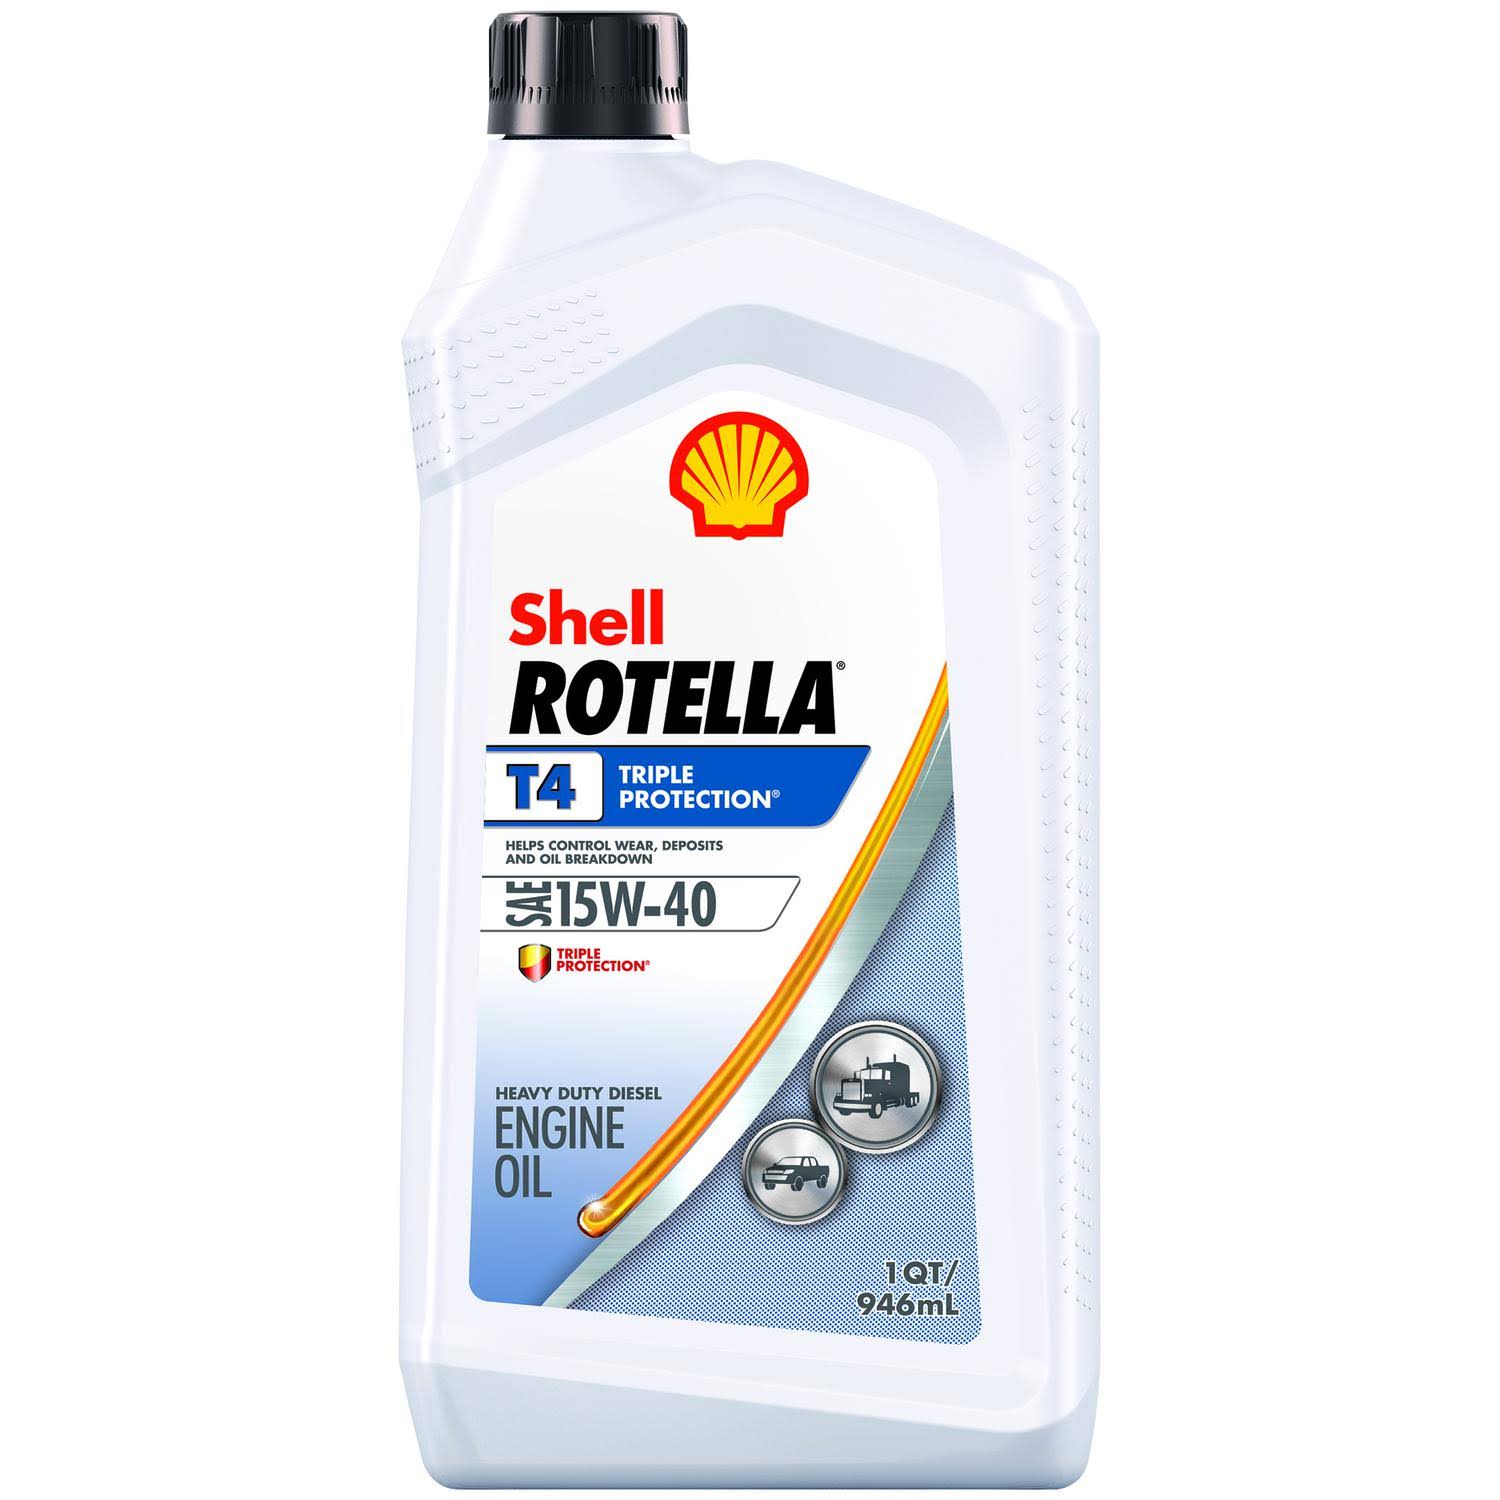 Shell Rotella T4 Triple Protection Motor Oil - 1qt